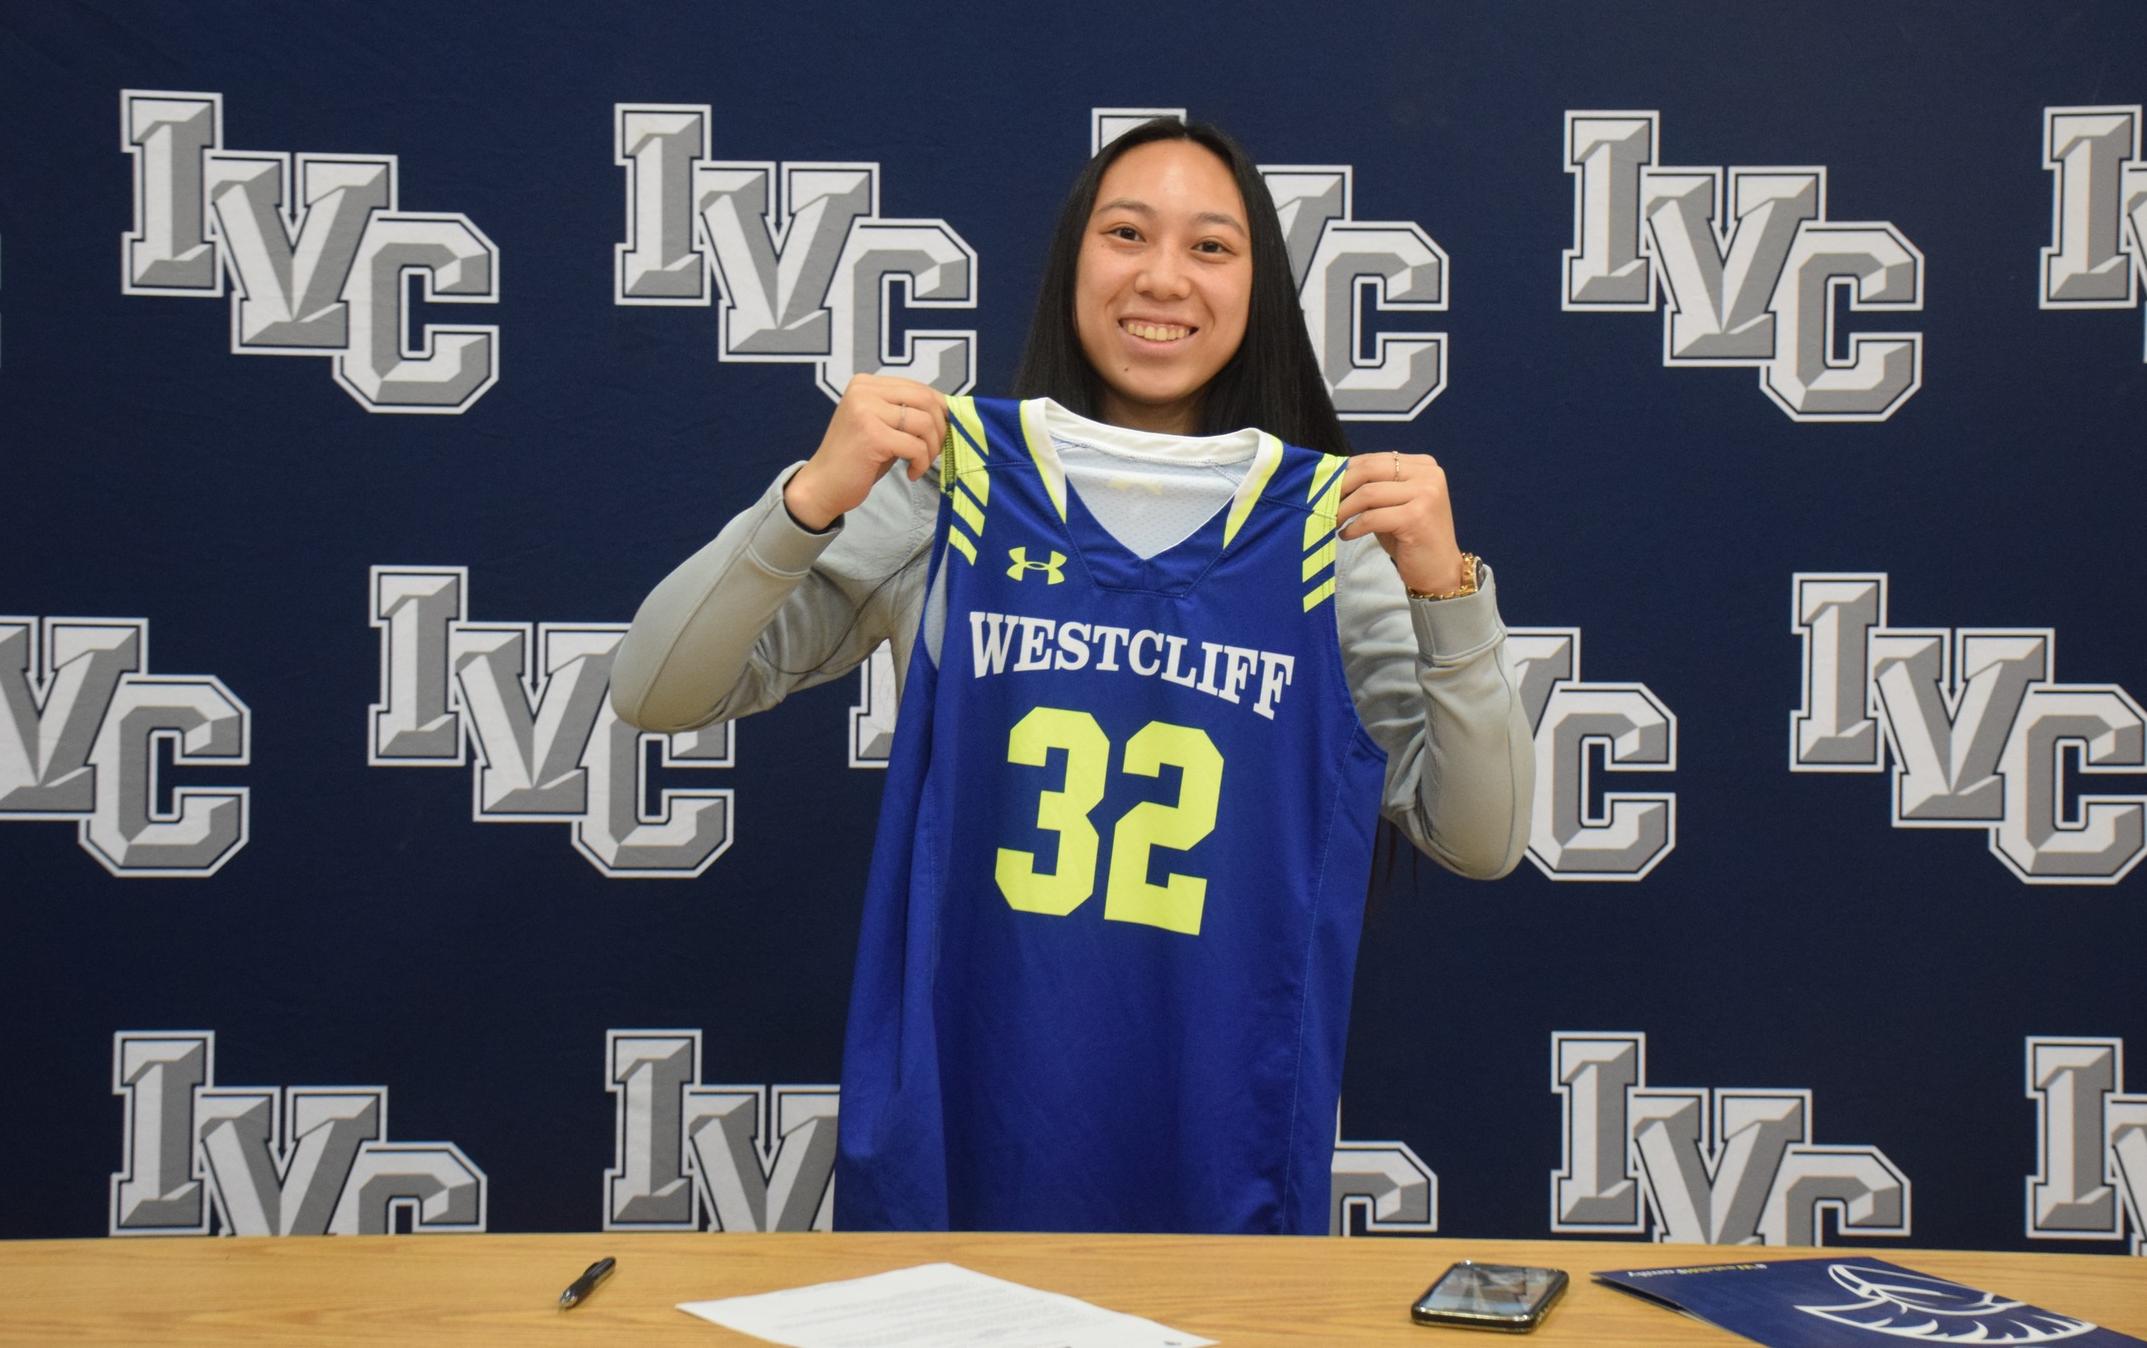 Women's basketball player Katie Nguyen signs with Westcliff